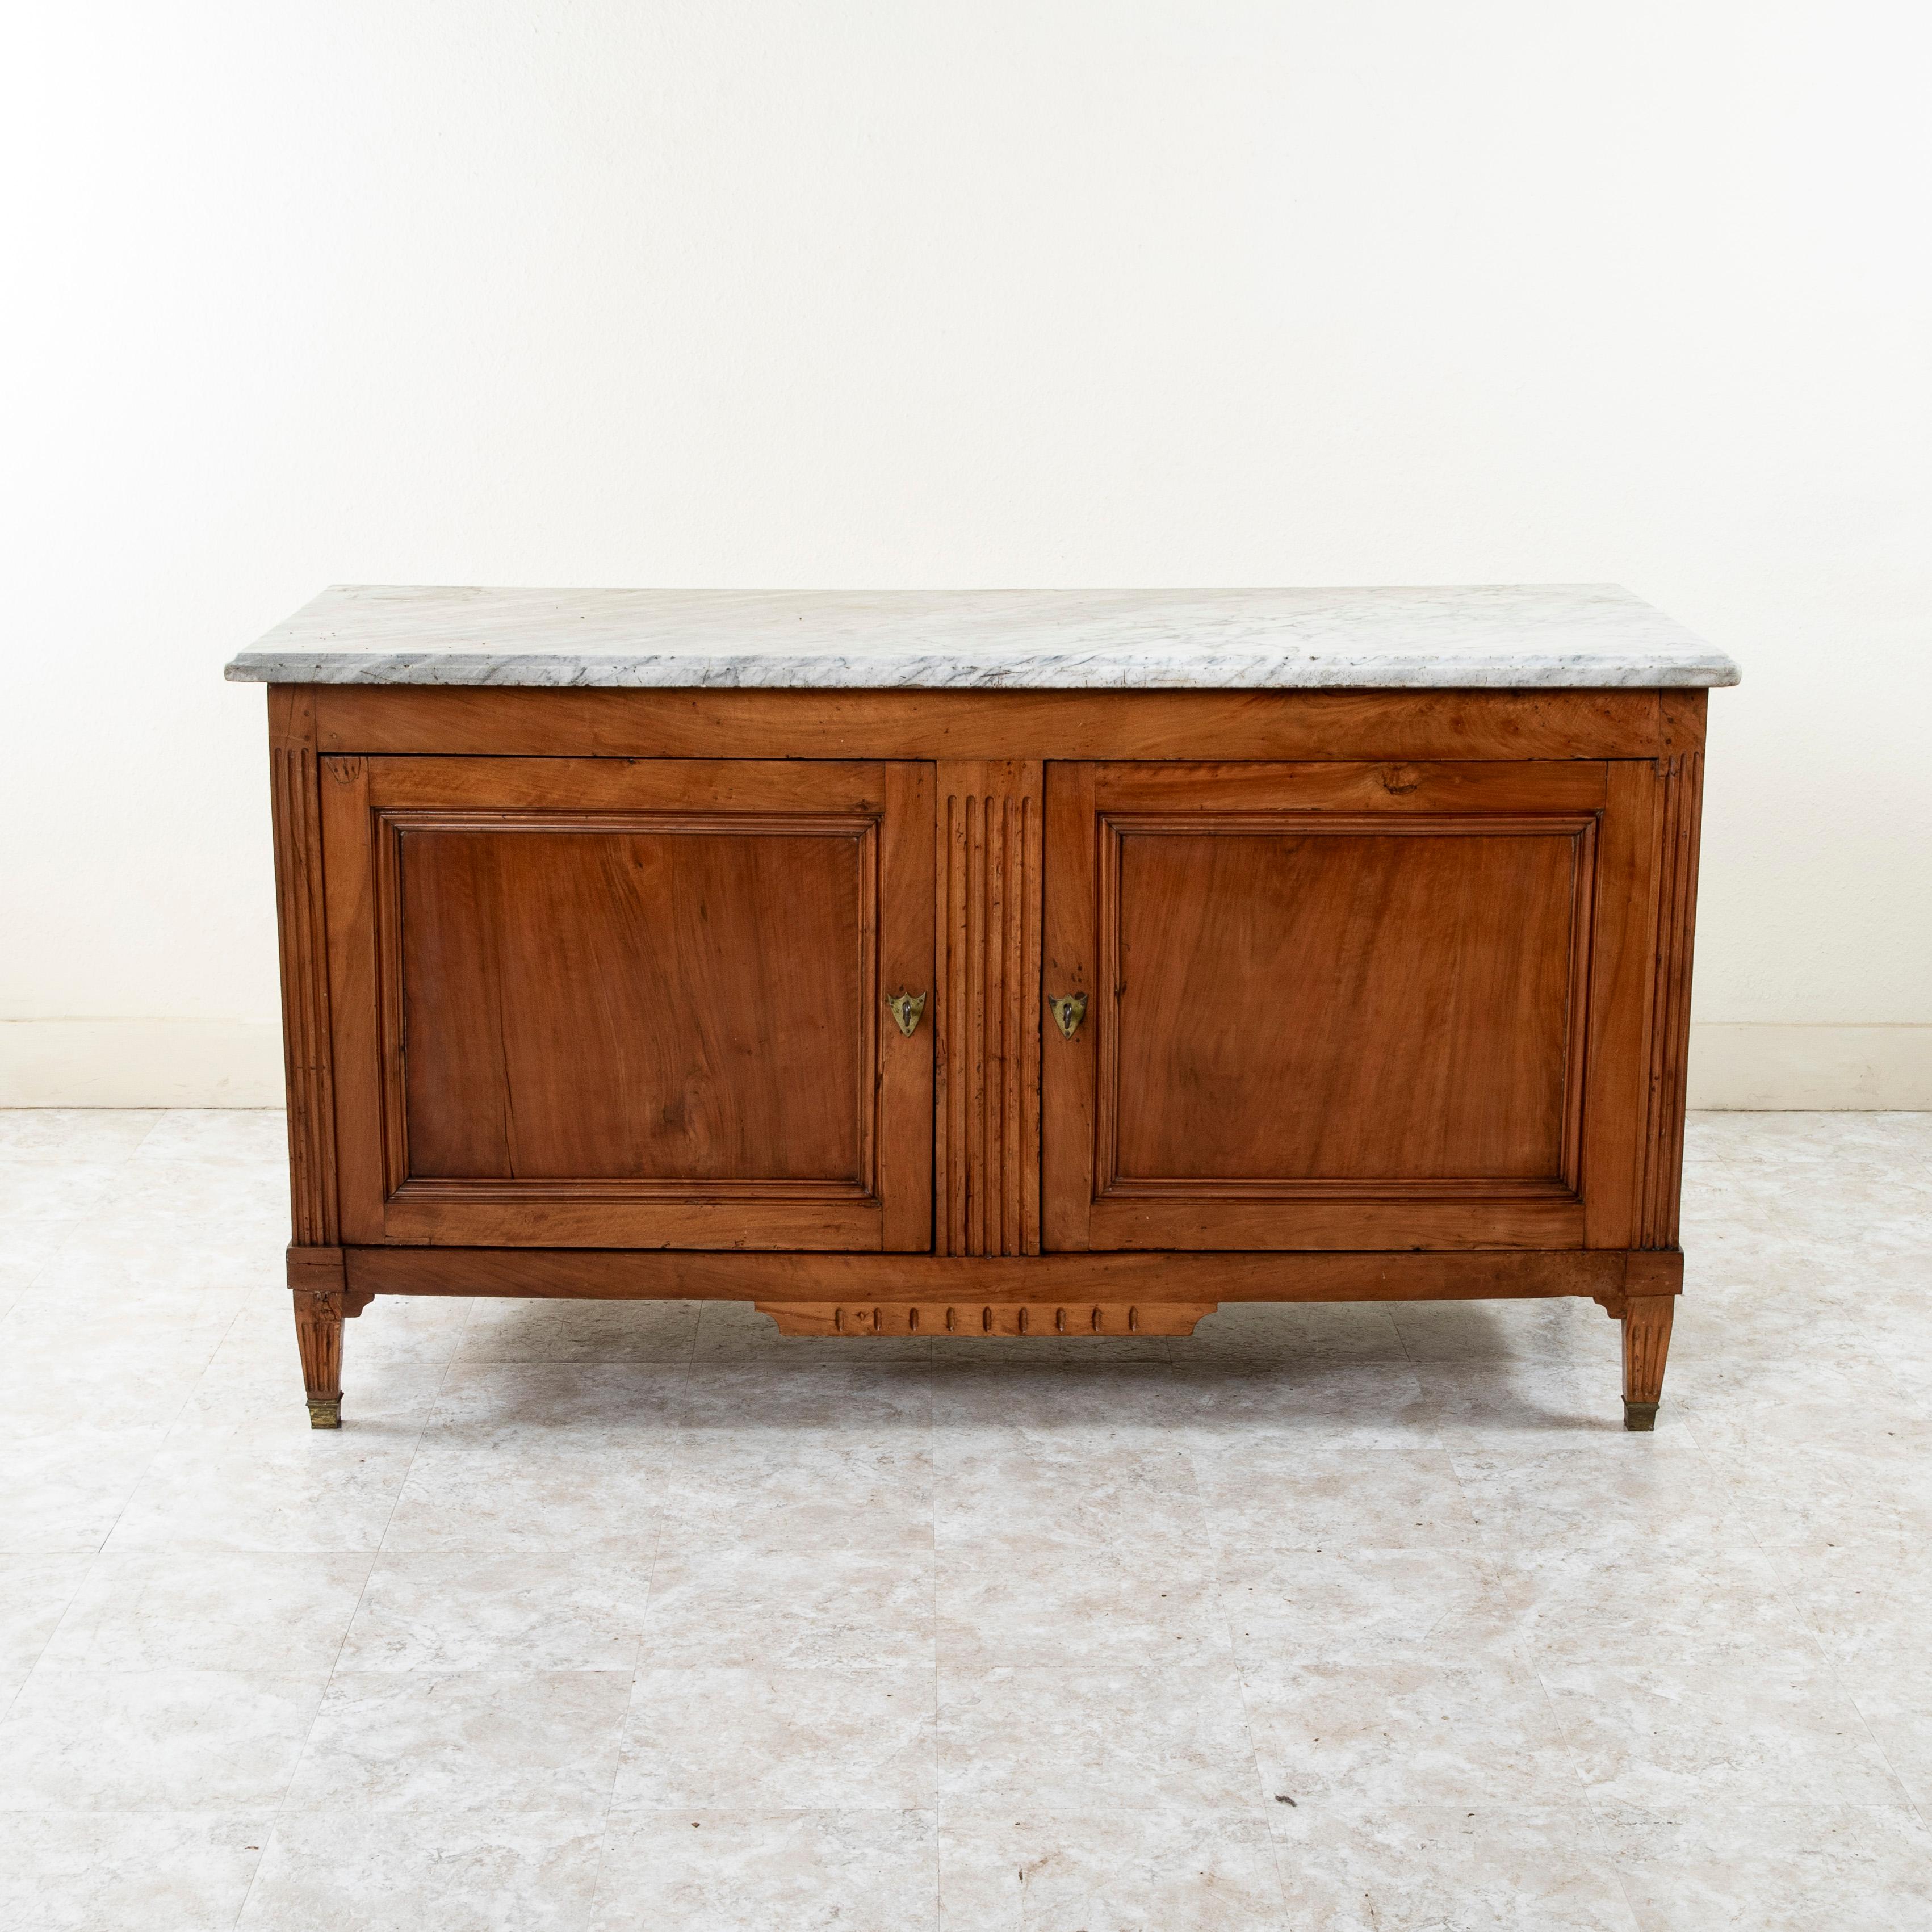 Found in Aix-en-Provence in southern France, this late eighteenth century Louis XVI period walnut hunt buffet features its original beveled marble top. Originally used in a hunting lodge where game was placed after the hunt, this buffet  is detailed